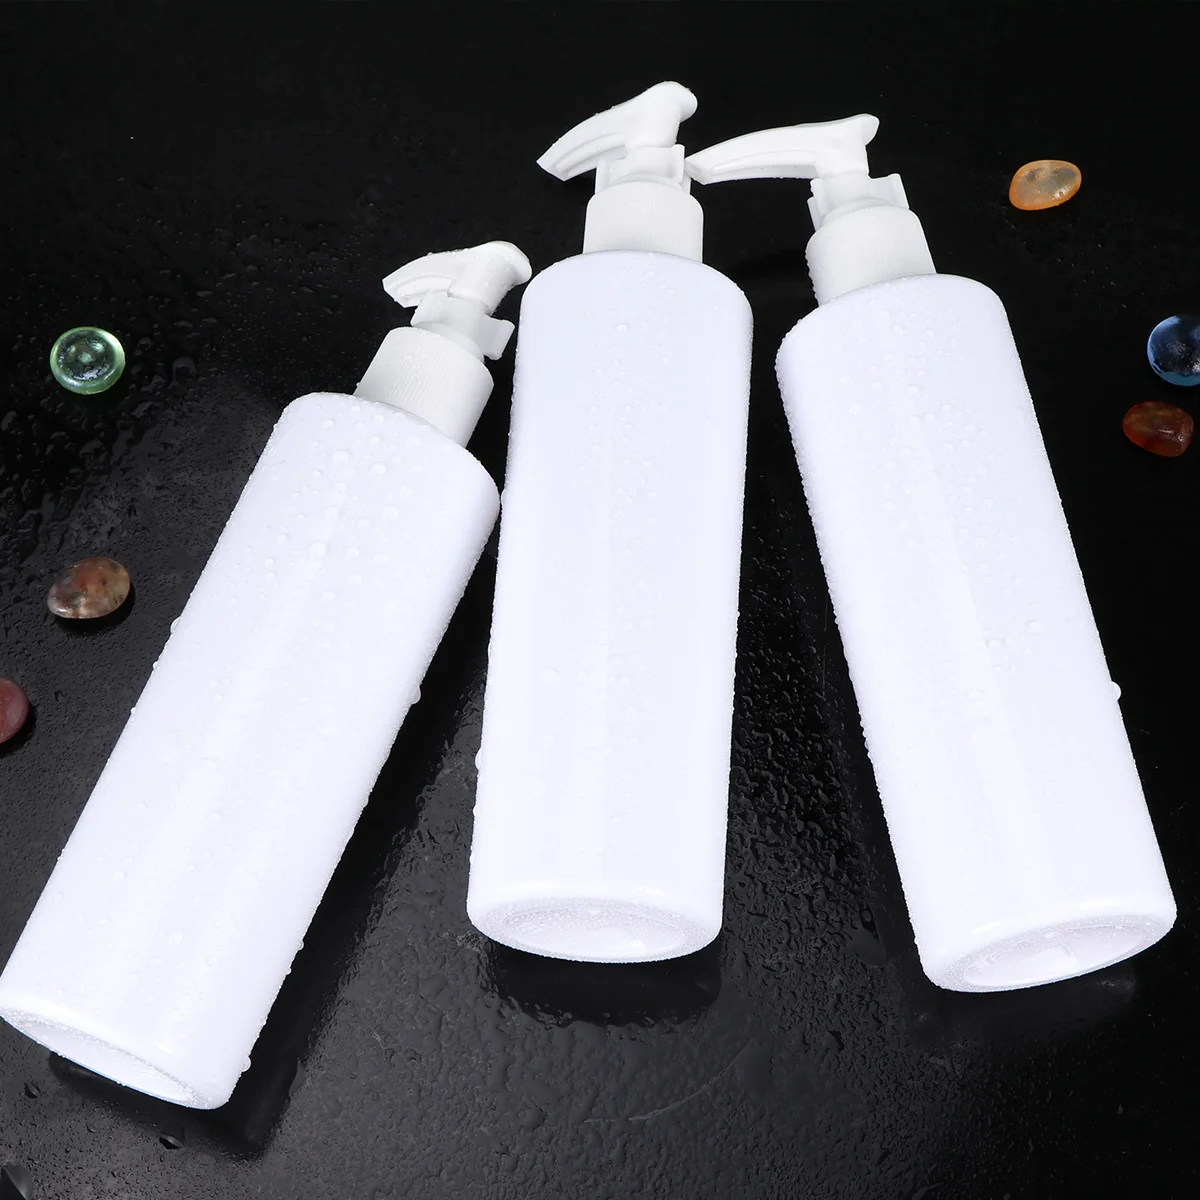 6PCS Travel Bottles 250ML Lotion Dispenser Bottle Multi- Pressure Lotion Subpackaging Pump Bottle for Dorm Hotel Home Kitchen totalcomfort plus ultrasonic air humidifier adjustable 5 3l water tank with warm and cool mist for home office nursery dorm